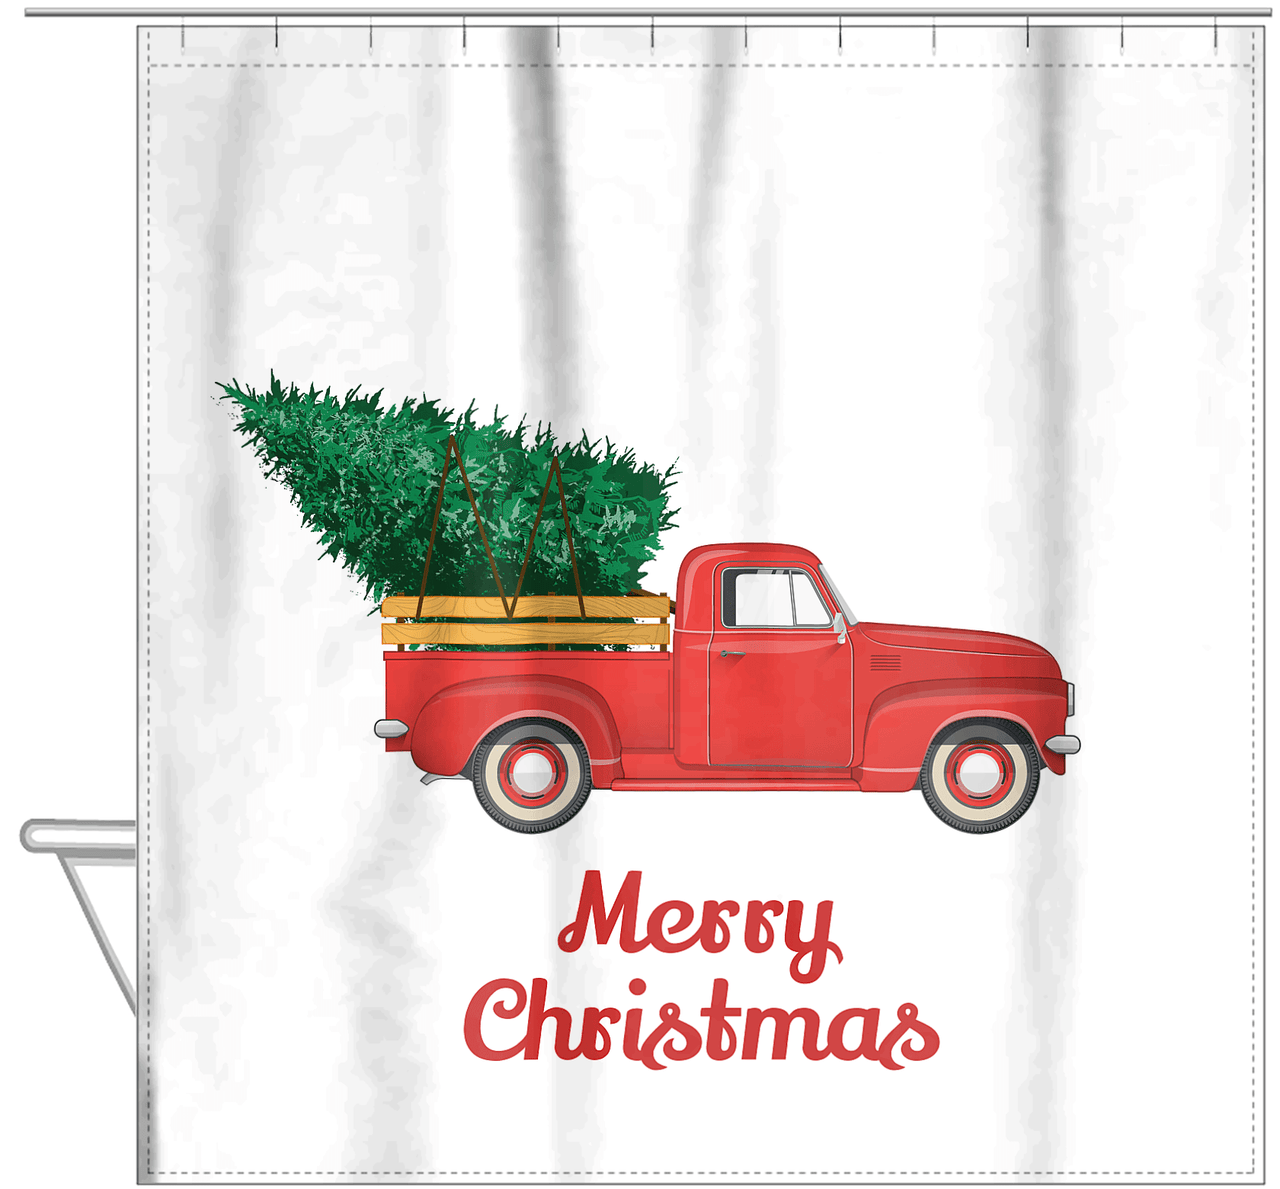 Personalized Christmas Shower Curtain - Old Red Truck with Christmas Tree - Hanging View